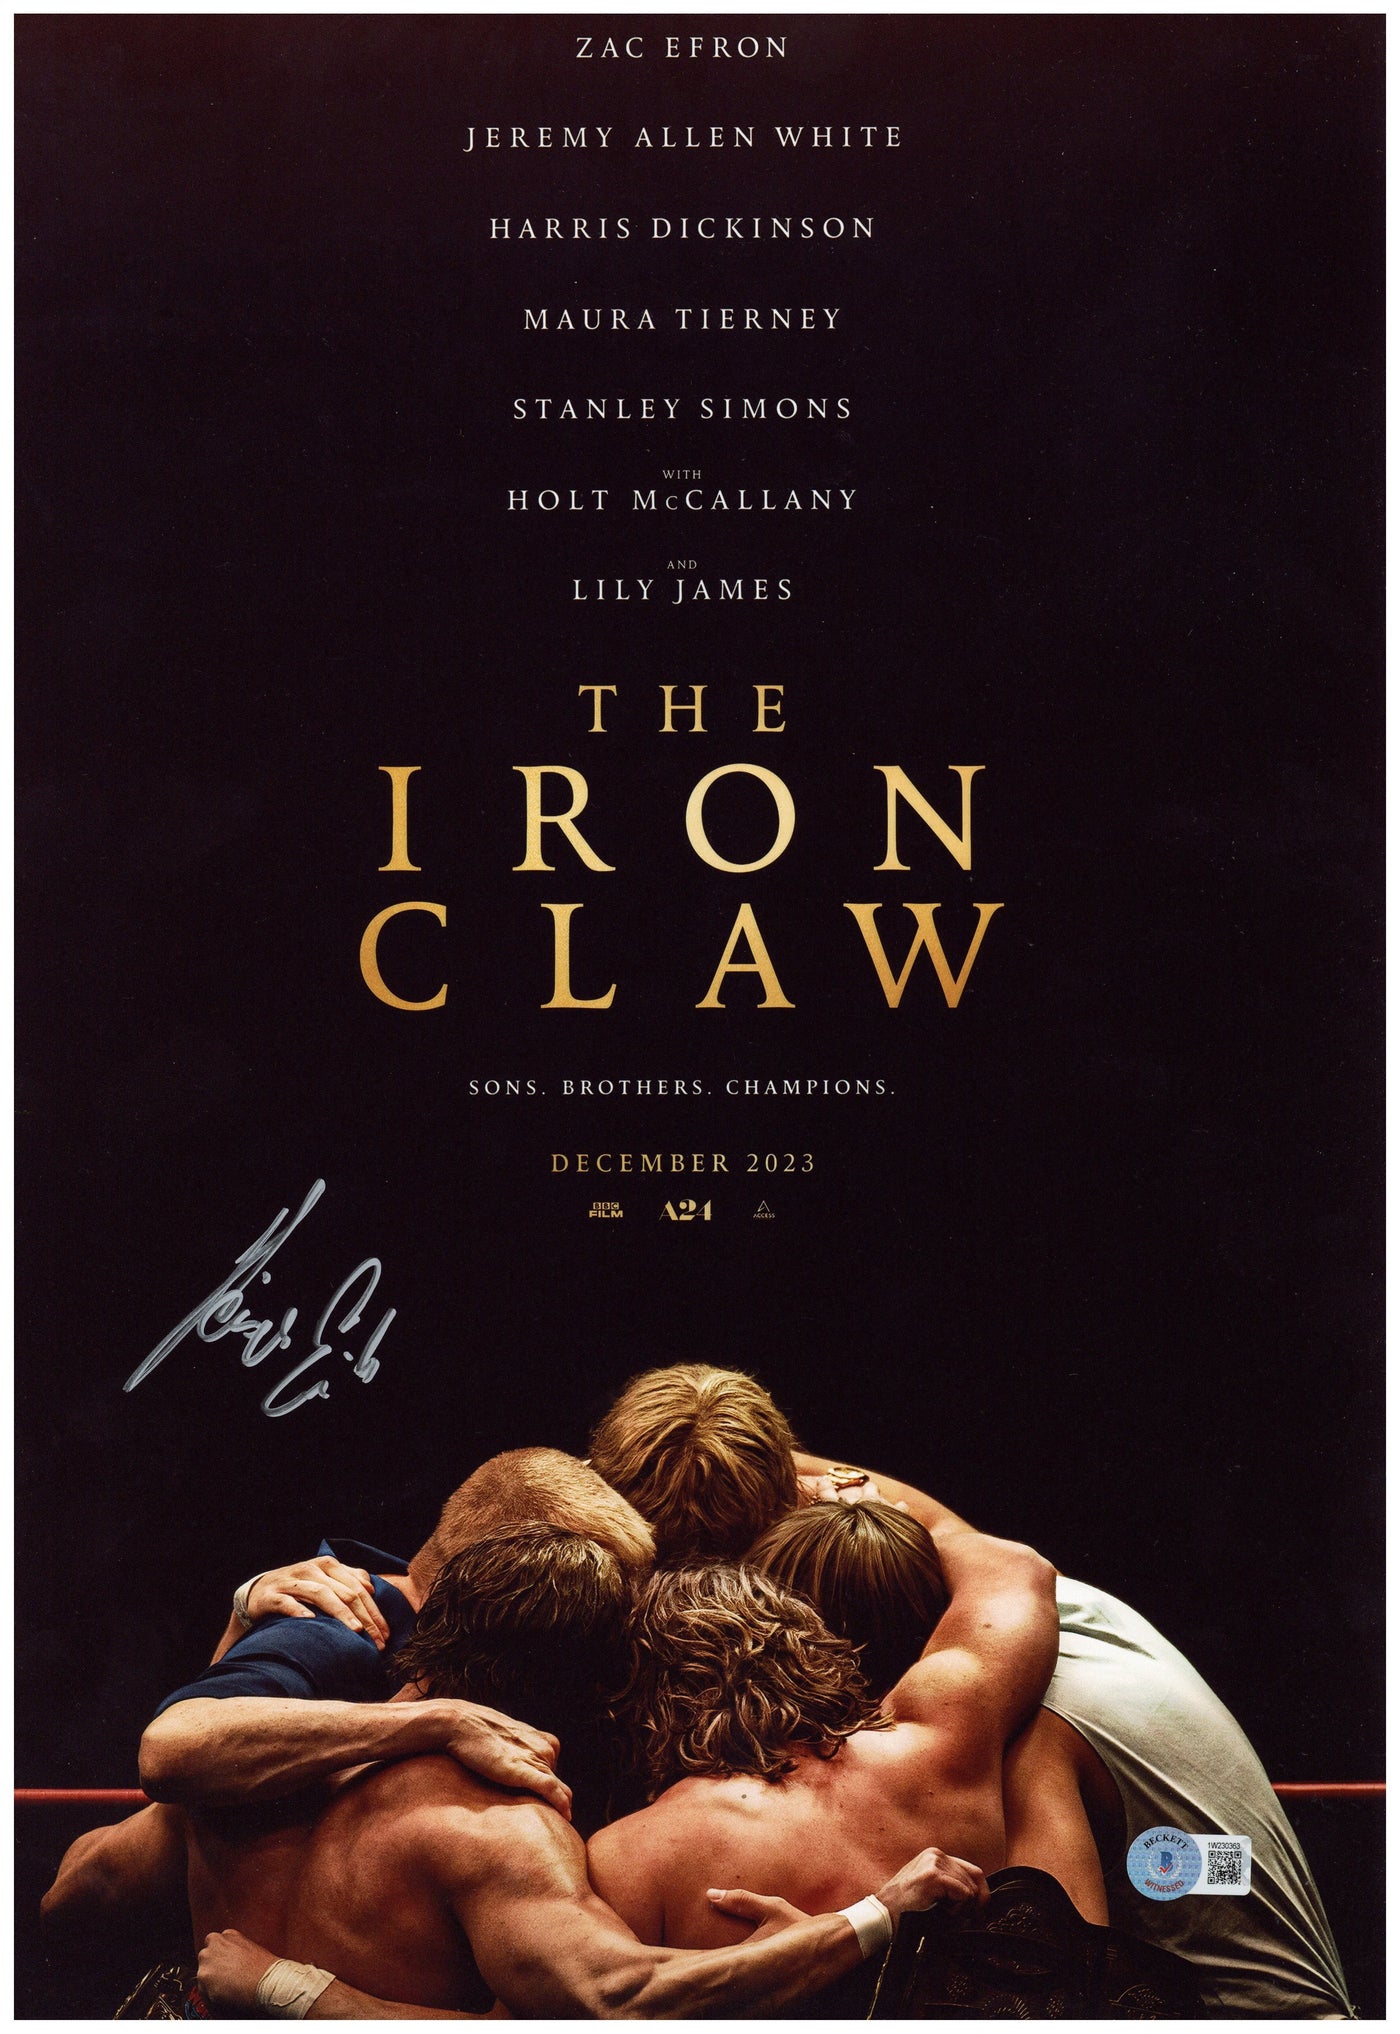 Kevin Von Erich Signed 12x18 Photo Iron Claw Autographed BAS COA